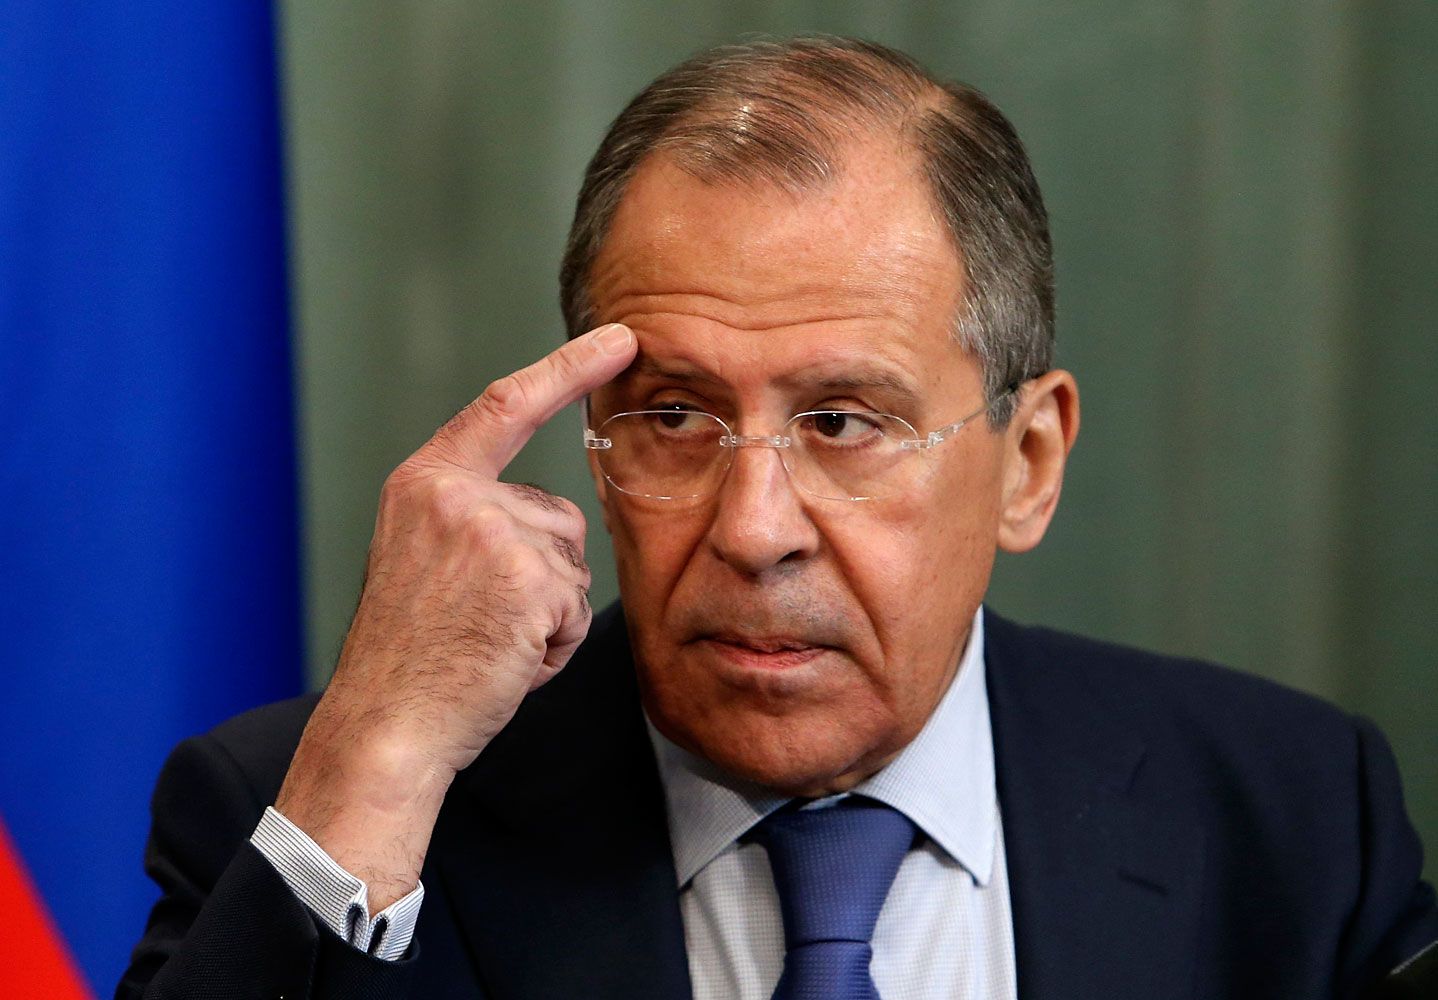 Russia's Foreign Minister Sergei Lavrov gestures during a news conference, after a meeting with his counterpart from Mozambique Oldemiro Baloi, in Moscow April 21, 2014.